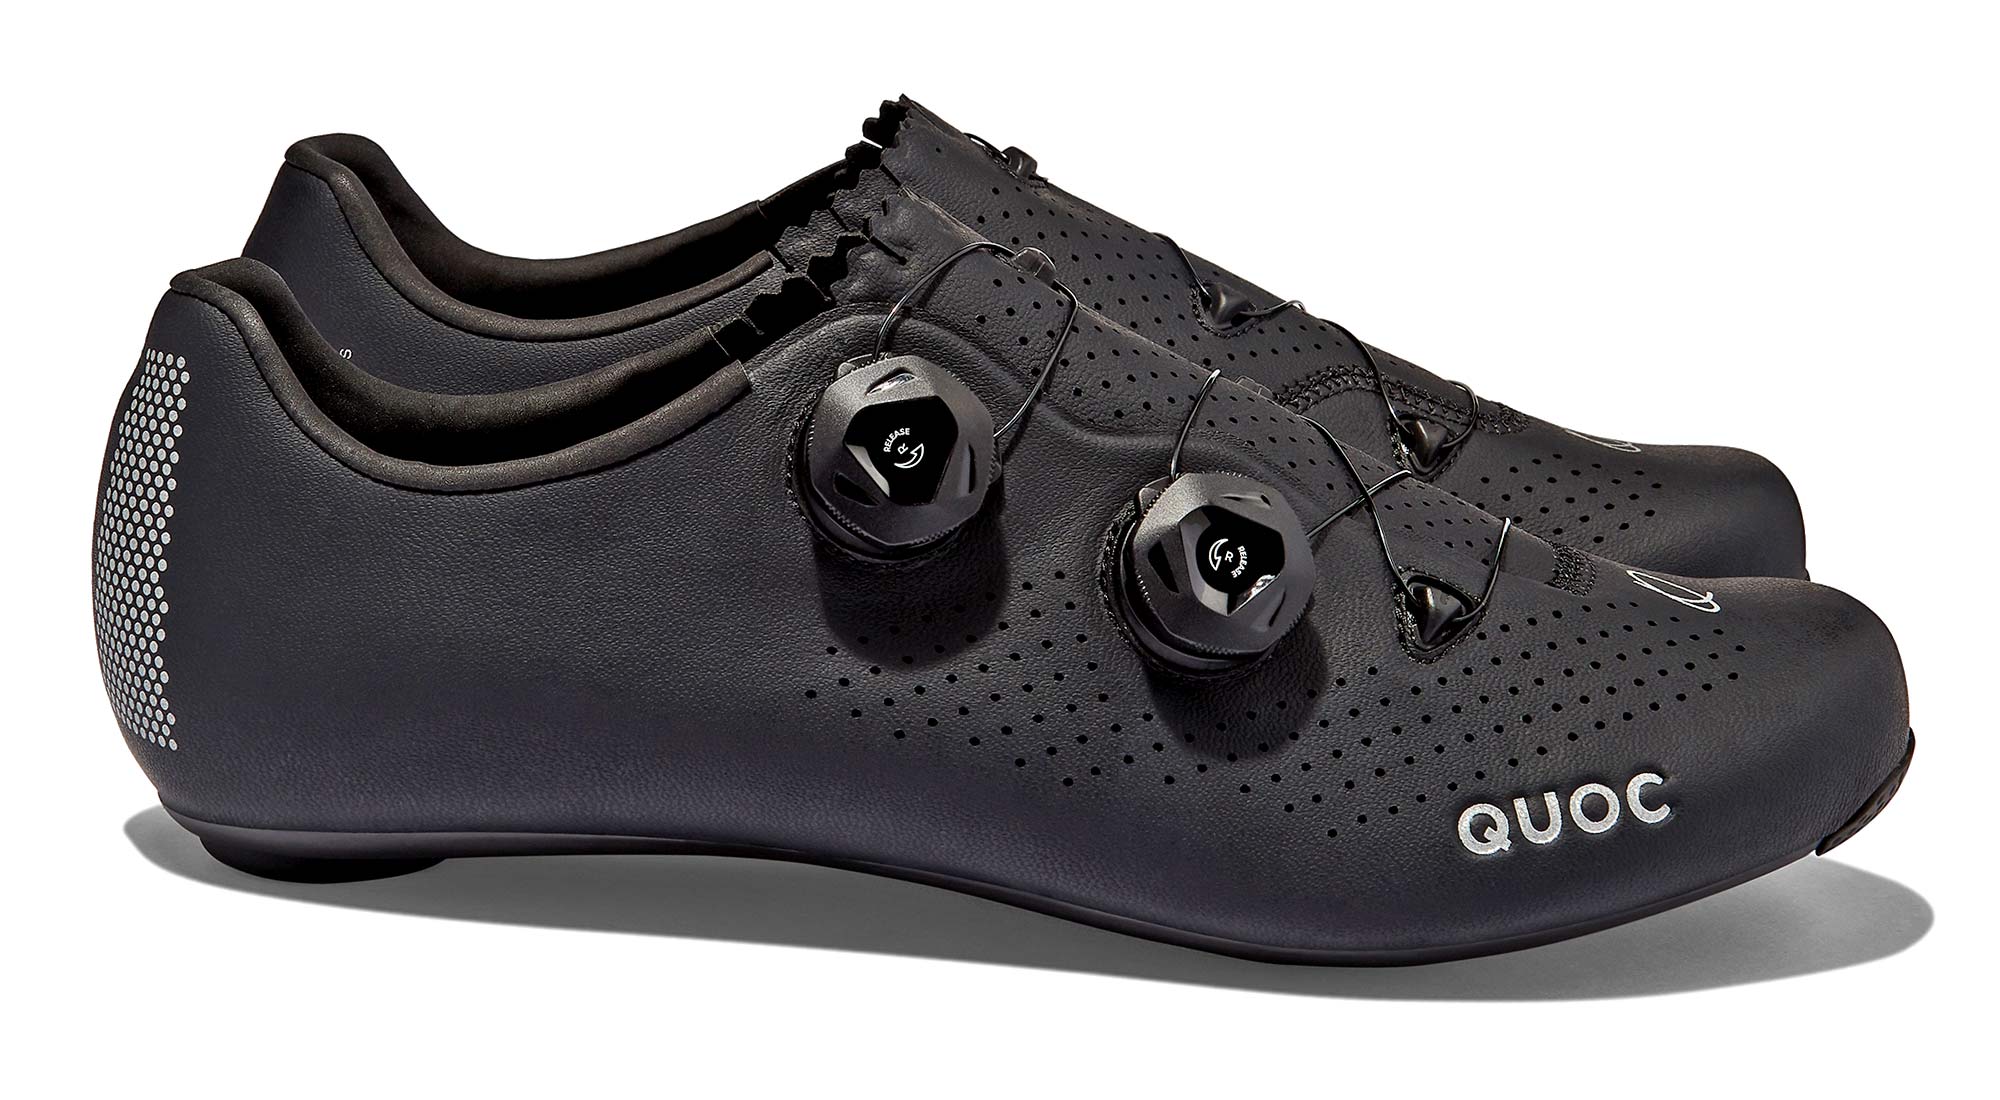 Quoc Mono II lightweight carbon-soled road cycling shoes, new upper